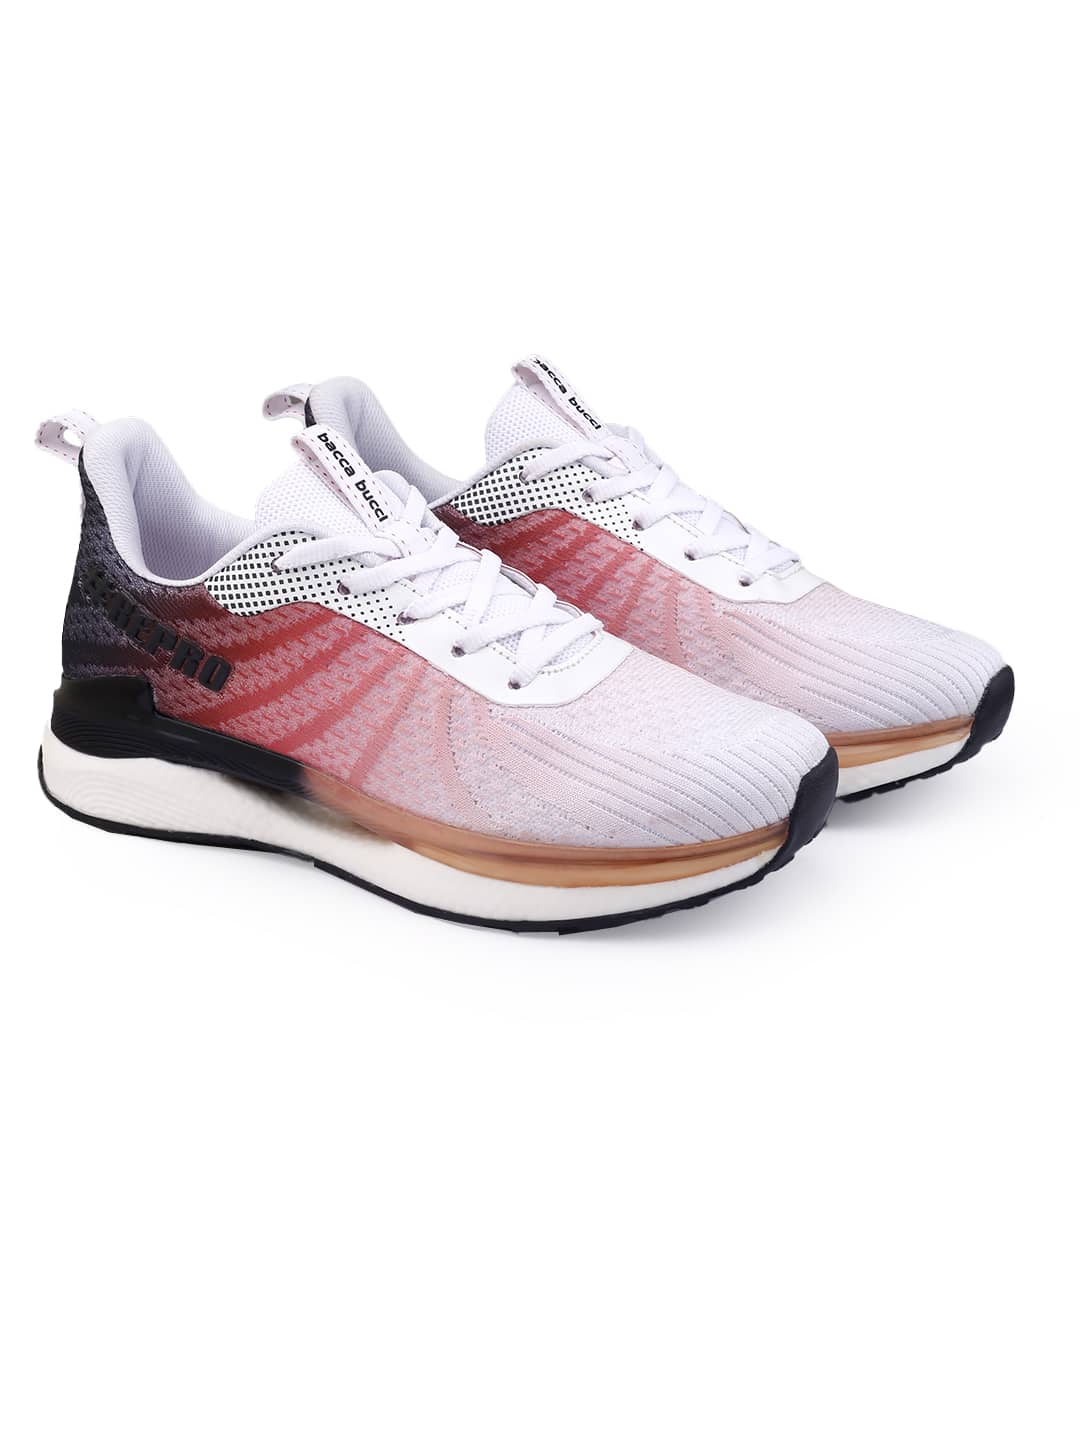 Bacca Bucci PacerEdge Elite Performance Running Shoes